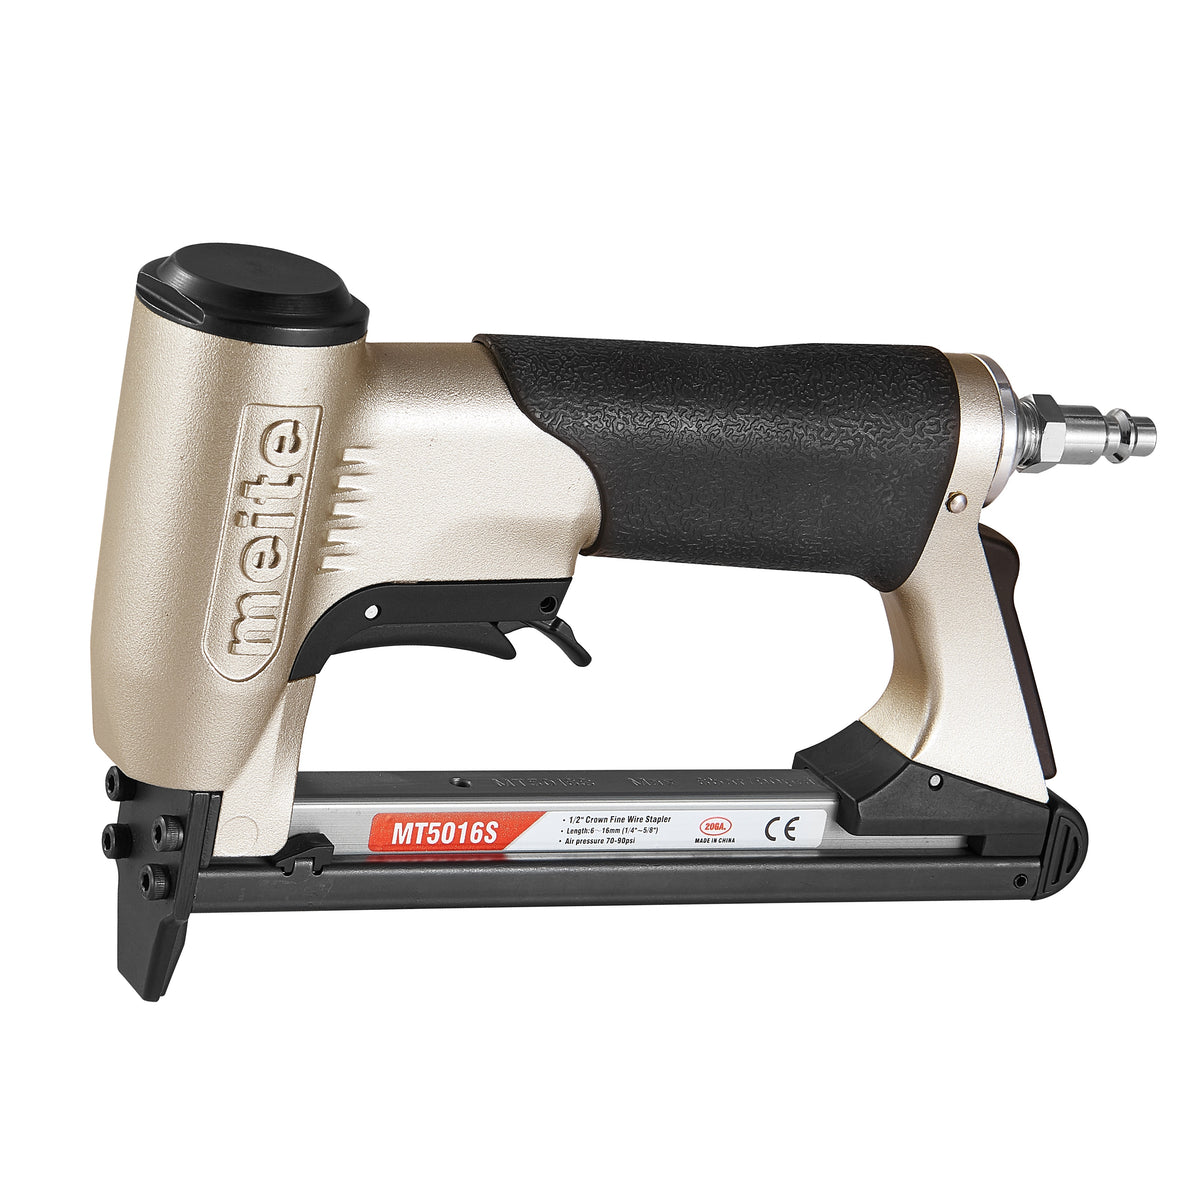 meite MT5016S 20GA 1/2-Inch Crown Pneumatic Upholstery Stapler Gun with Safety